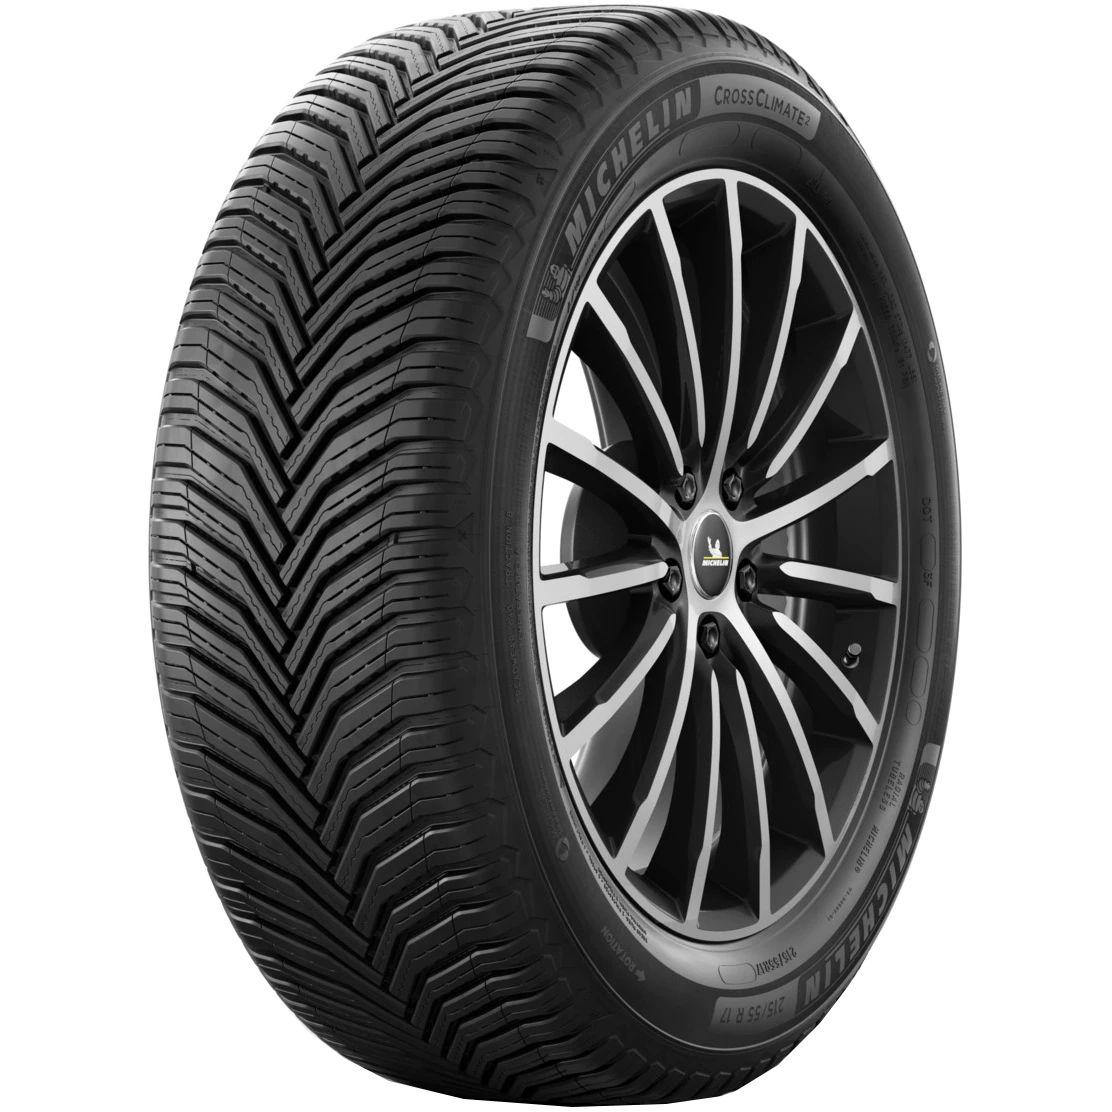 Anvelope all seasons MICHELIN CrossClimate2 M+S XL 205/50 R17 93W